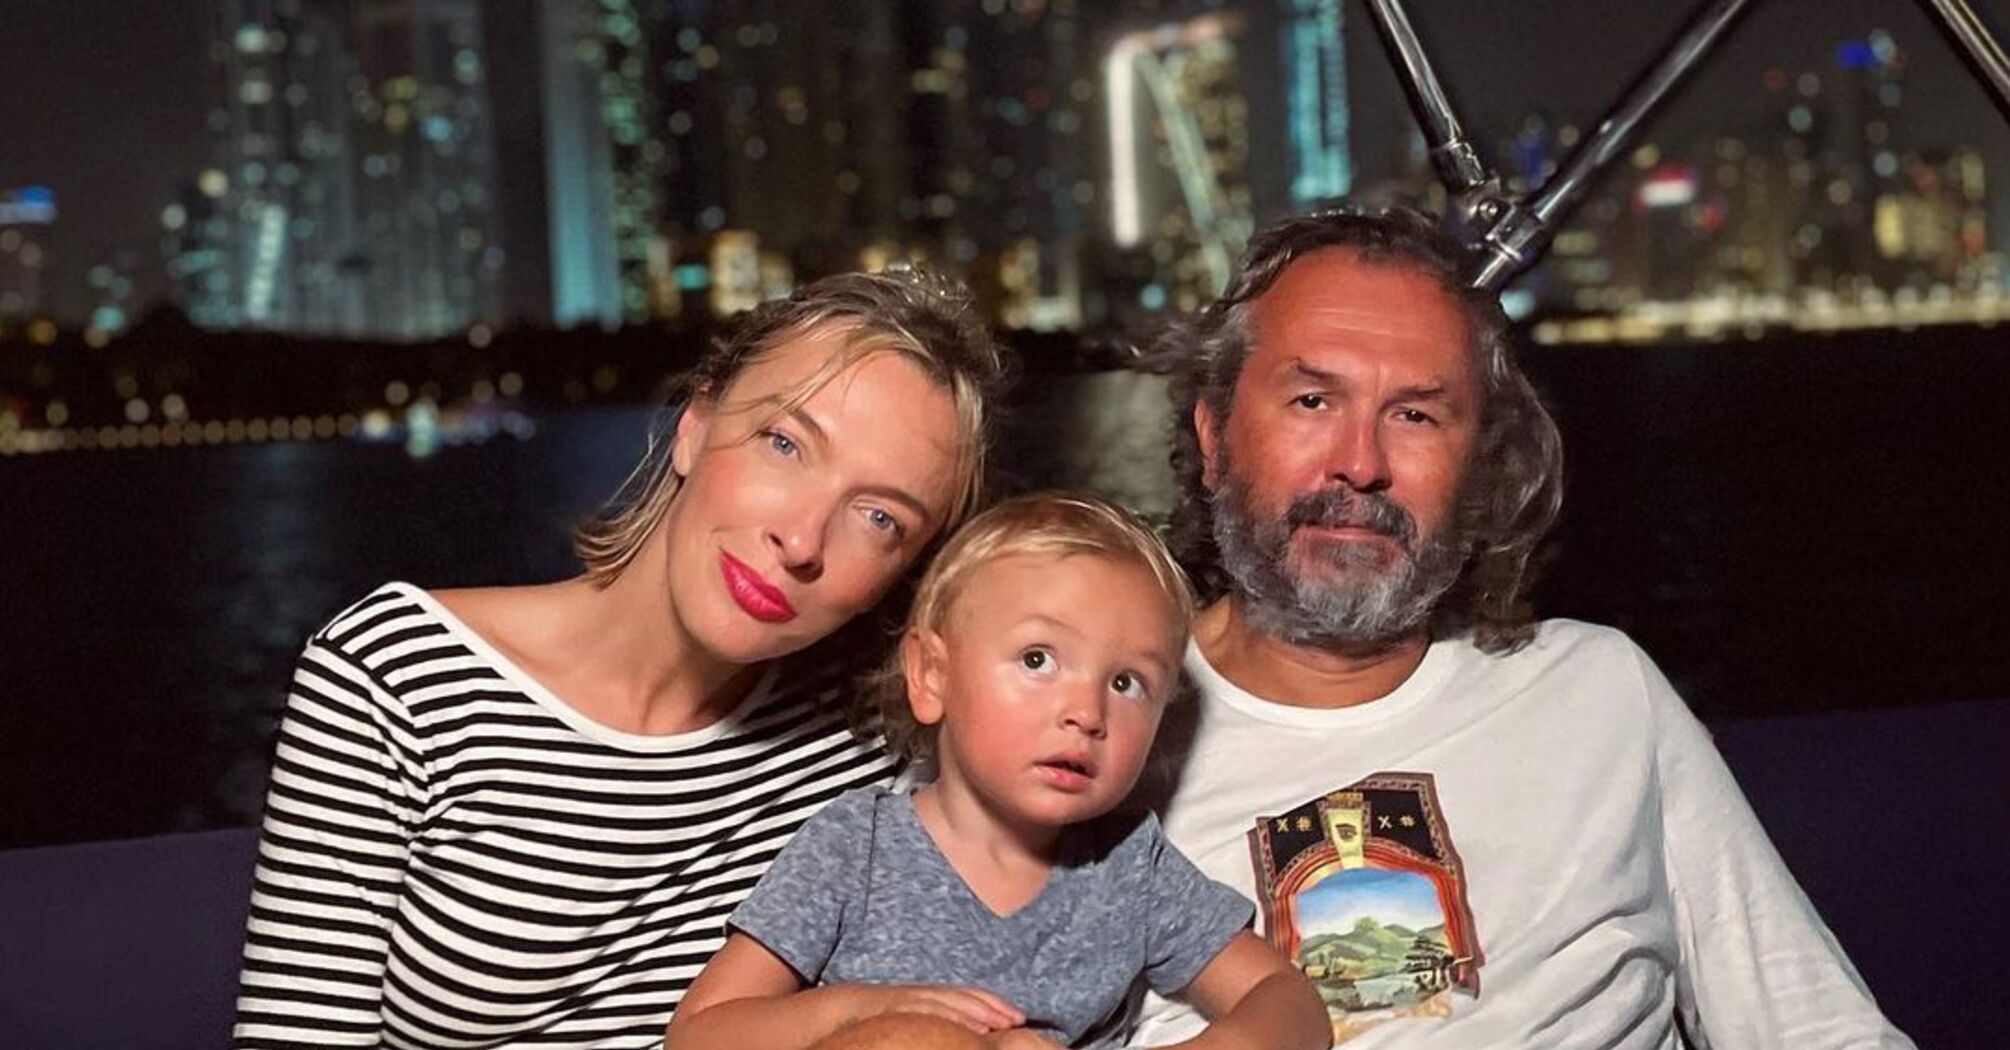 Vasylisa Frolova showed a rare photo with her husband and 3-year-old son